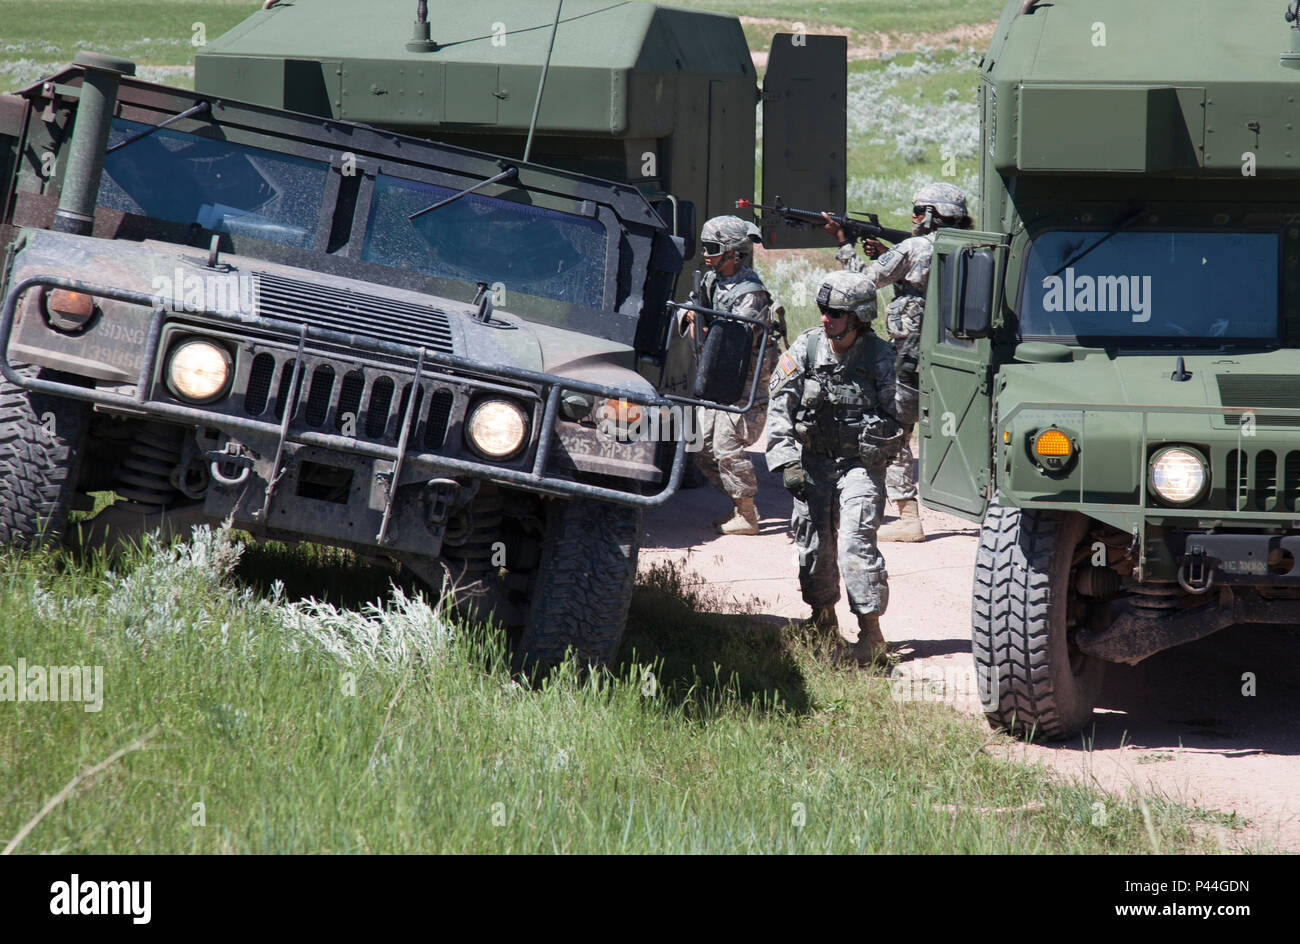 U.S. Army Soldiers of the 396th Medical Company (Ground Ambulance) and 235th Military Police Company, Army Reserve, react to a simulated ambush in a convoy operations exercise during the Golden Coyote exercise in Camp Guernsey, Wyo., June 15, 2016. The Golden Coyote exercise is a three-phase, scenario-driven exercise conducted in the Black Hills of South Dakota and Wyoming, which enables commanders to focus on mission essential task requirements, warrior tasks and battle drills. (U.S. Army photo by Spc. Chenyang Liu/Released) Stock Photo